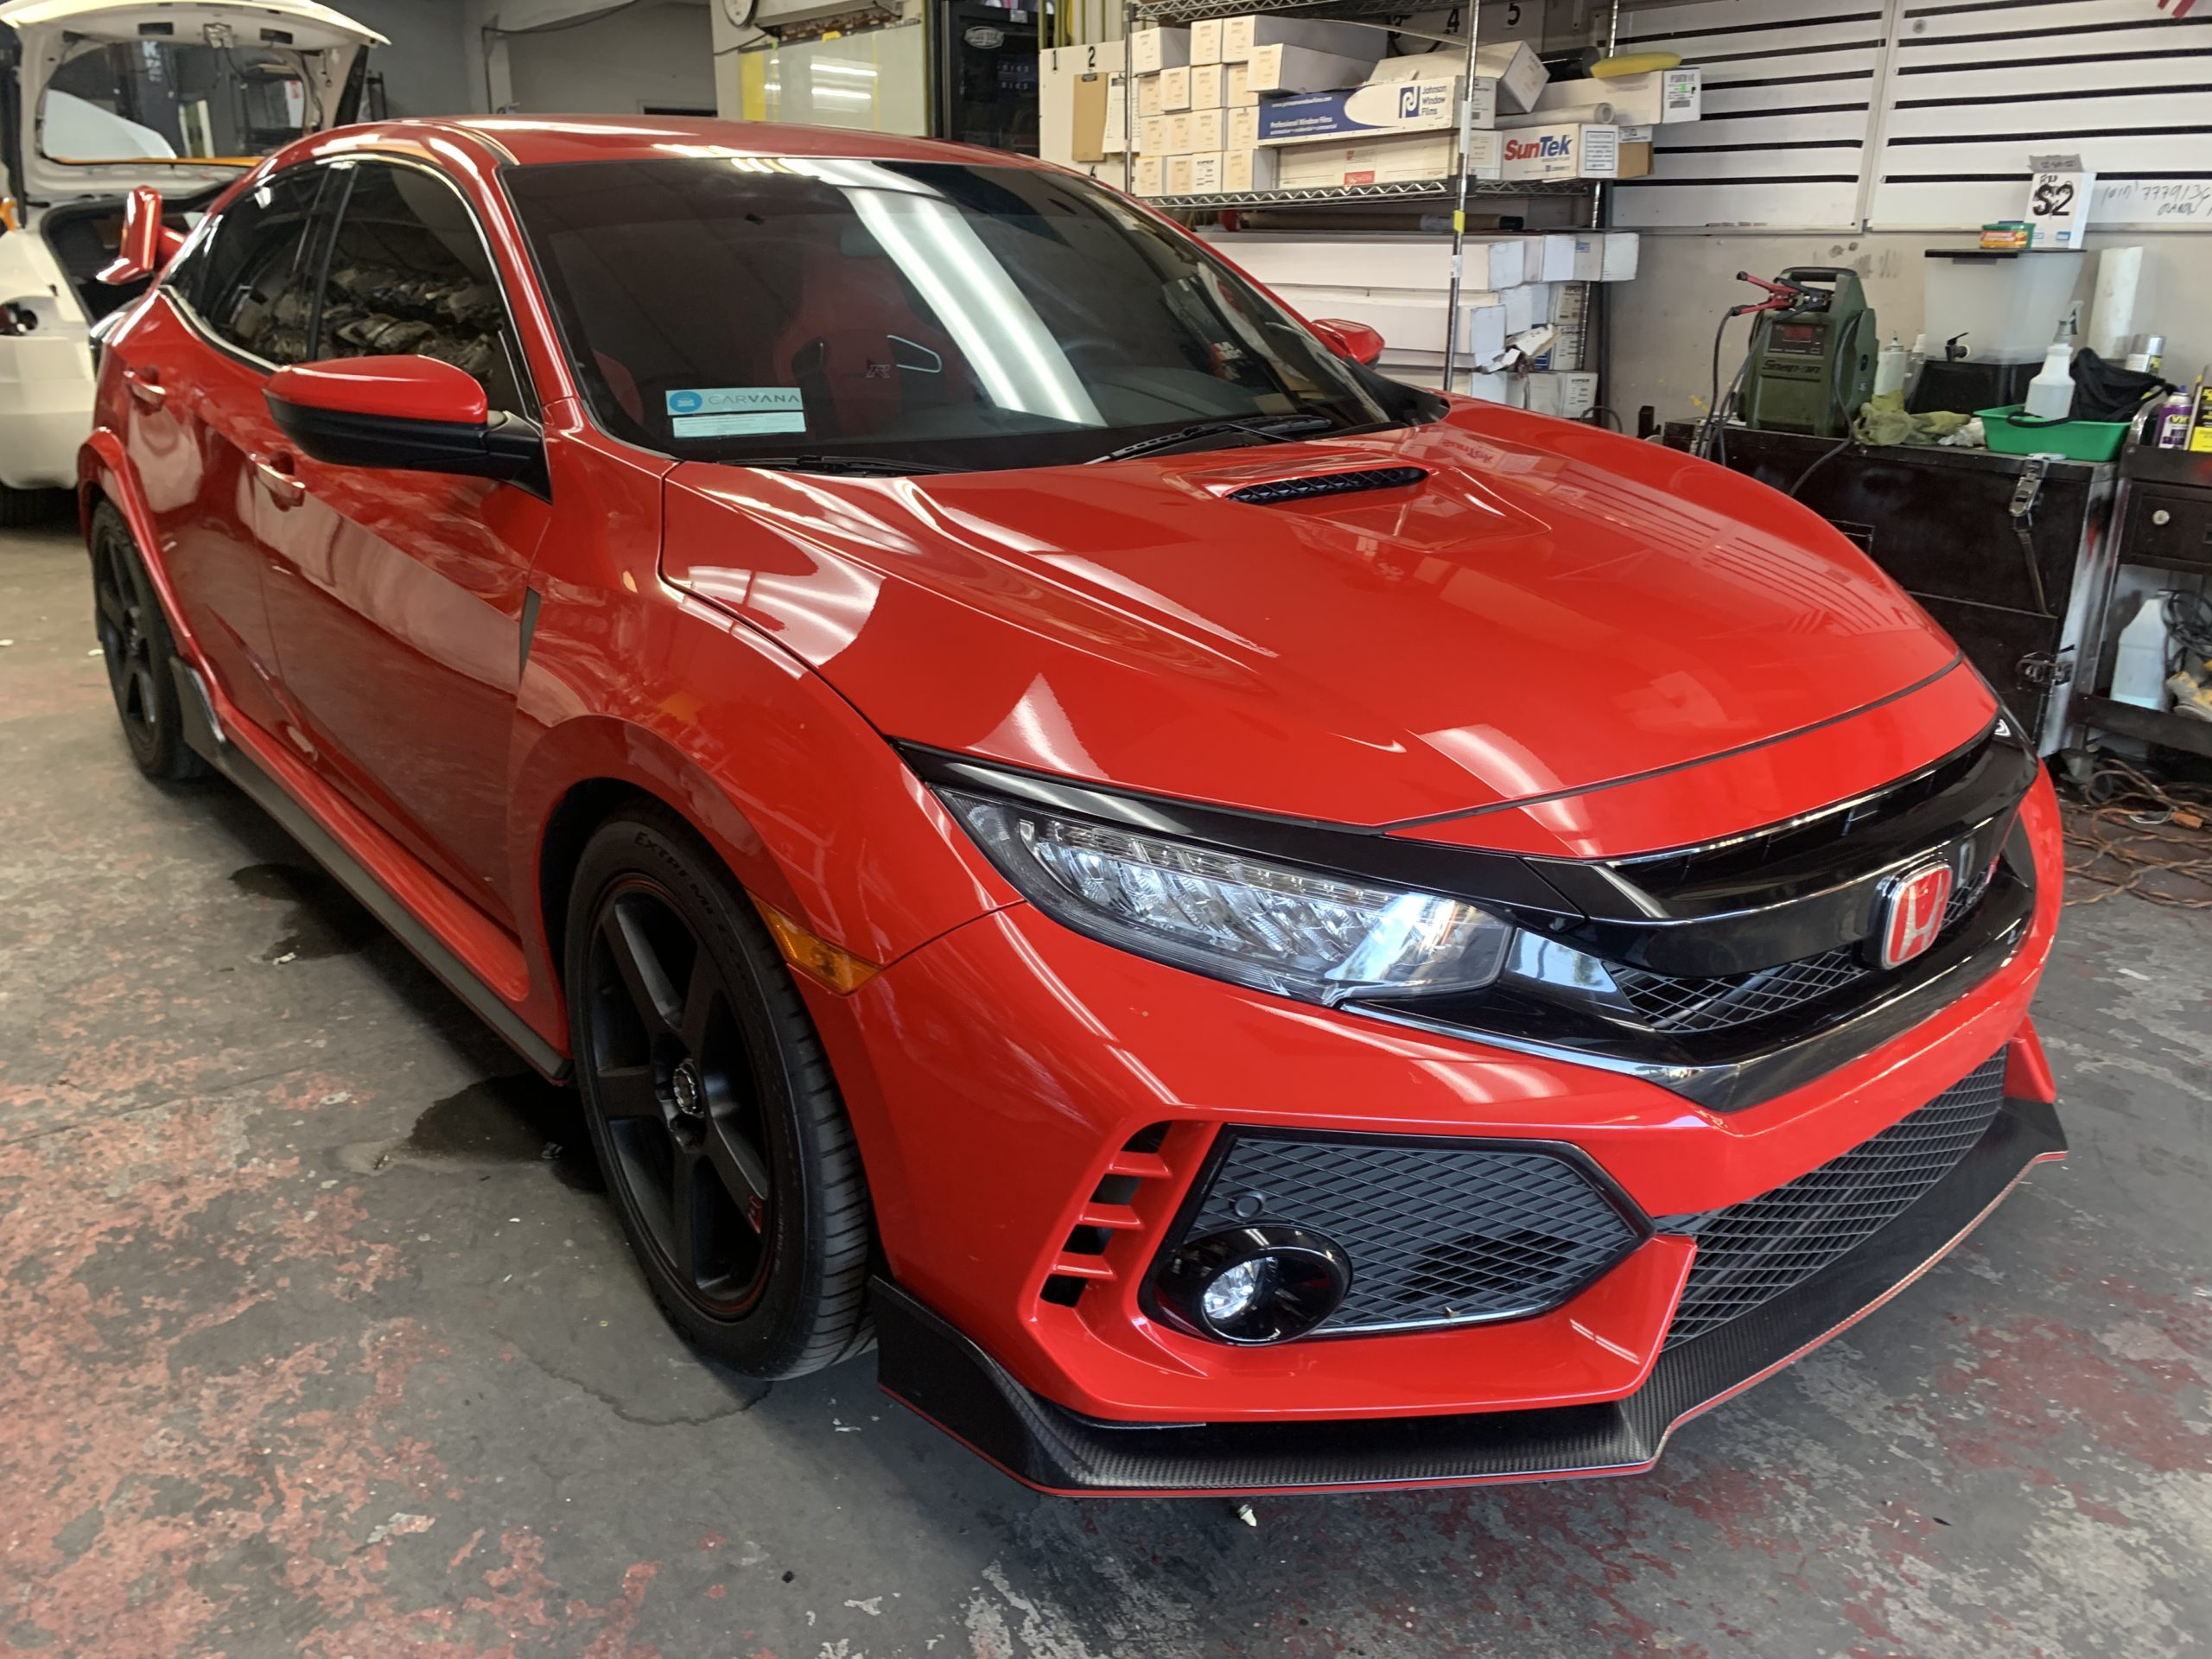 Auto Paint Shop In San Diego, Full Auto Body Work